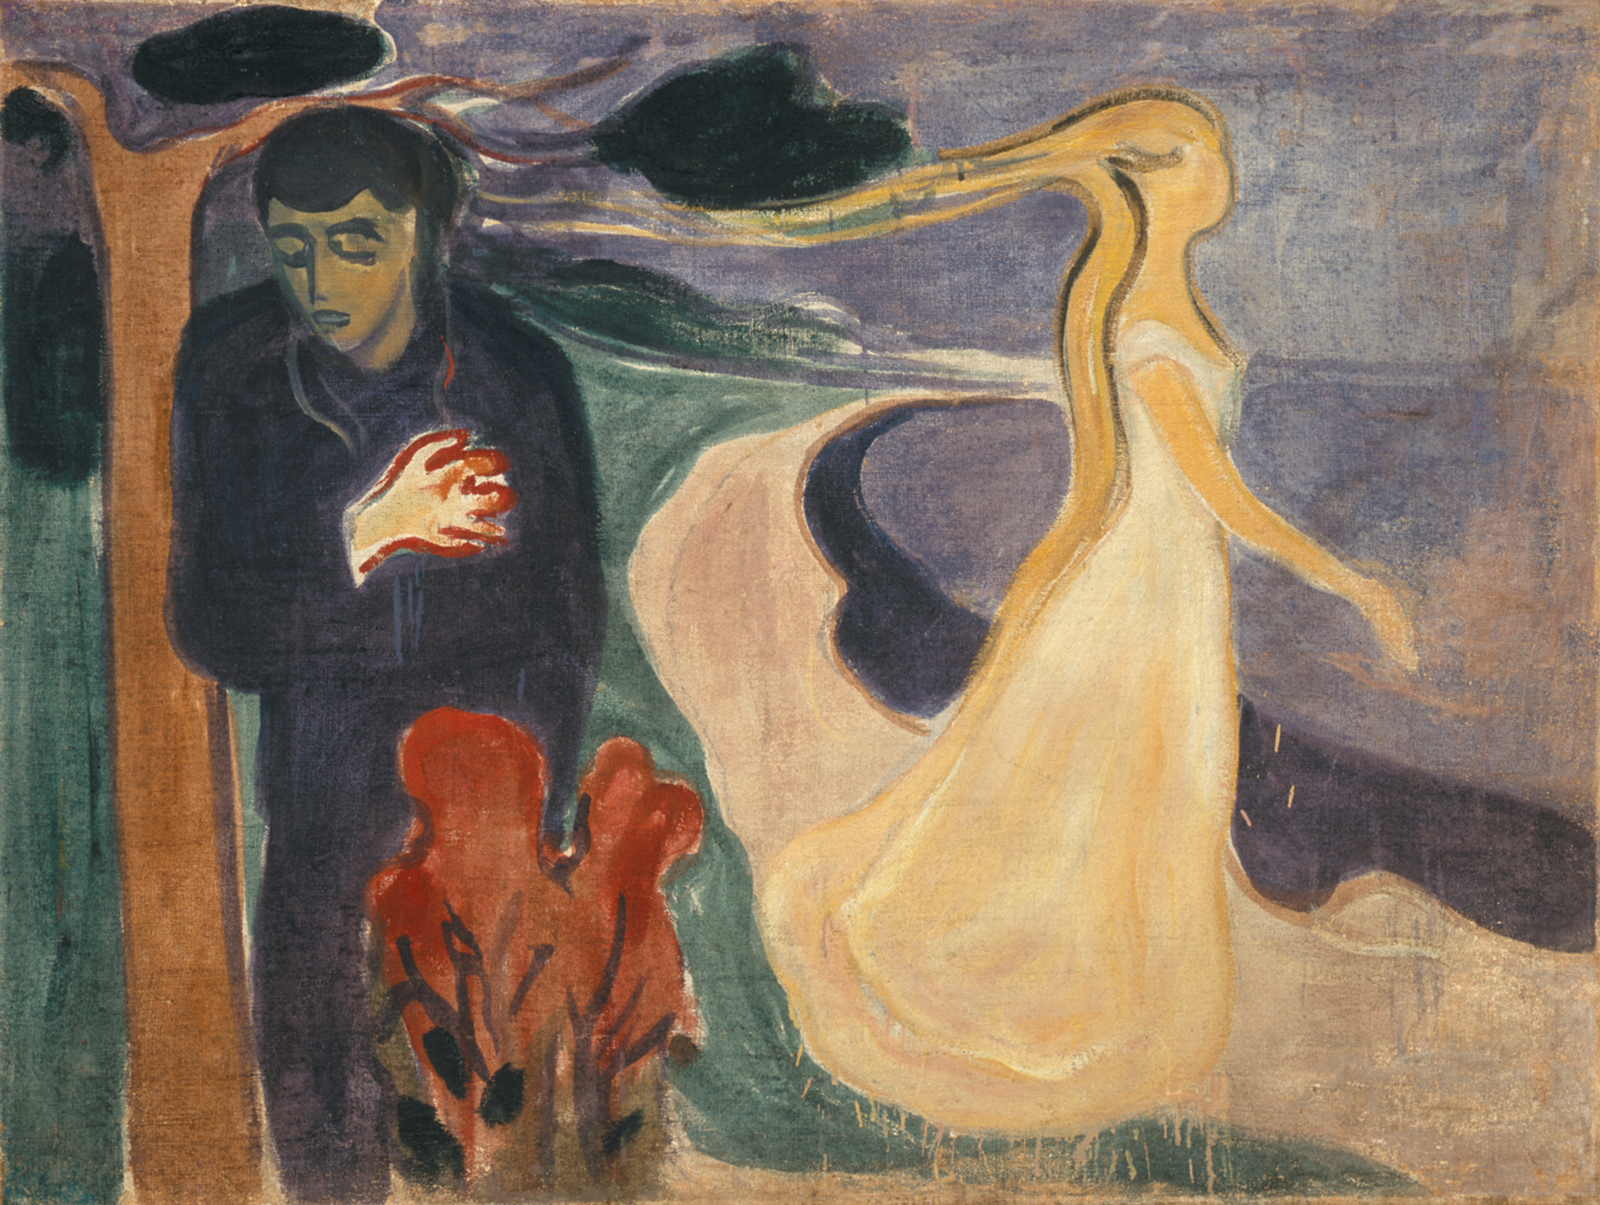 Edvard Munch: Separation, 1896; from the exhibition ‘Munch and Expressionism,’ at the Neue Galerie, New York City, February 18–June 13. The catalog is edited by Jill Lloyd and published by Prestel.